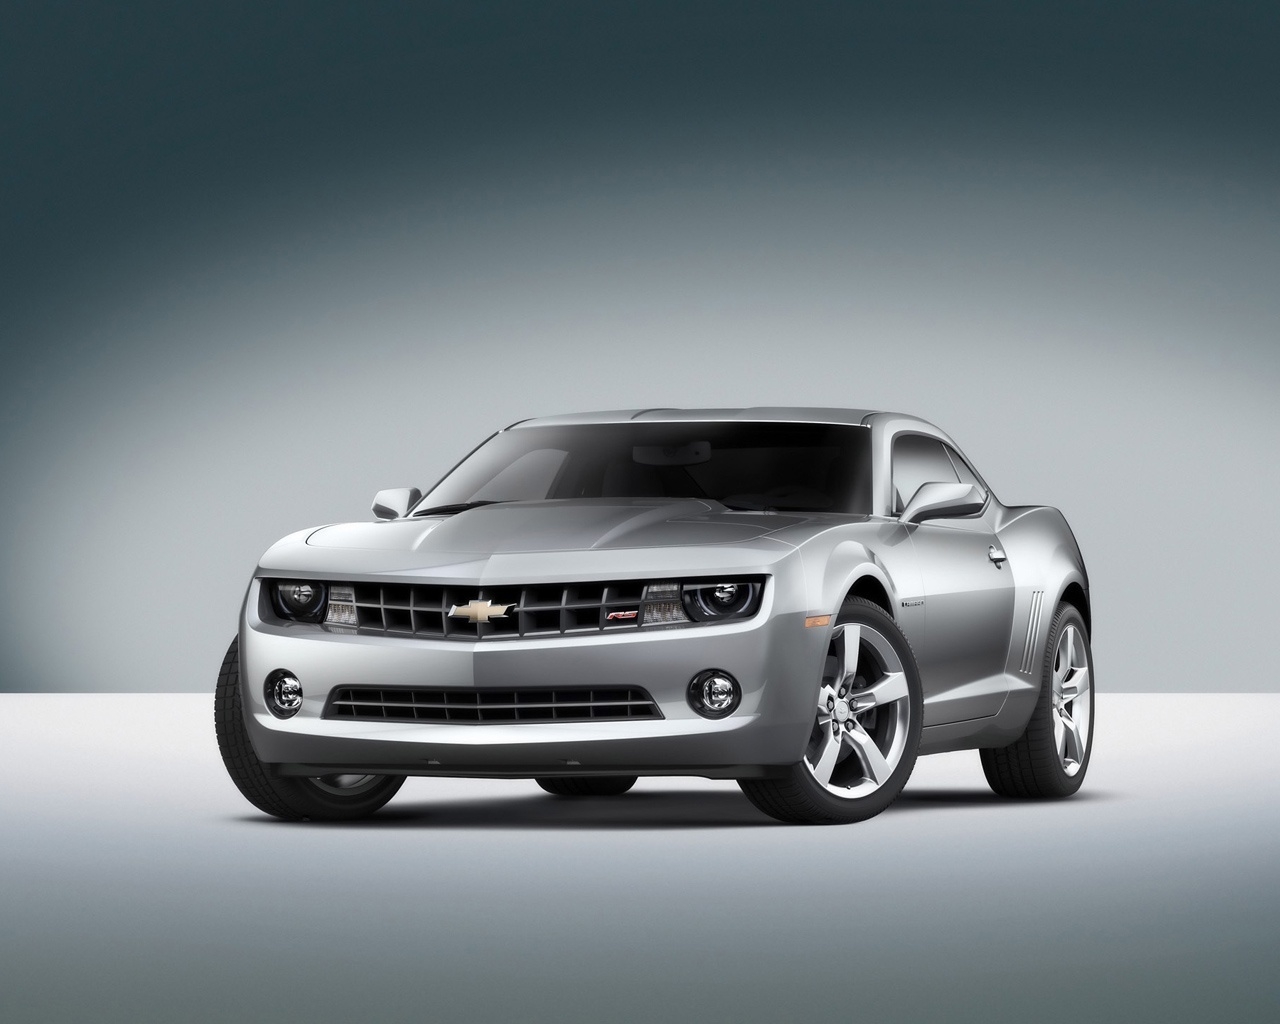 Chevrolet Camaro RS 2010 Grey Front Angle for 1280 x 1024 resolution